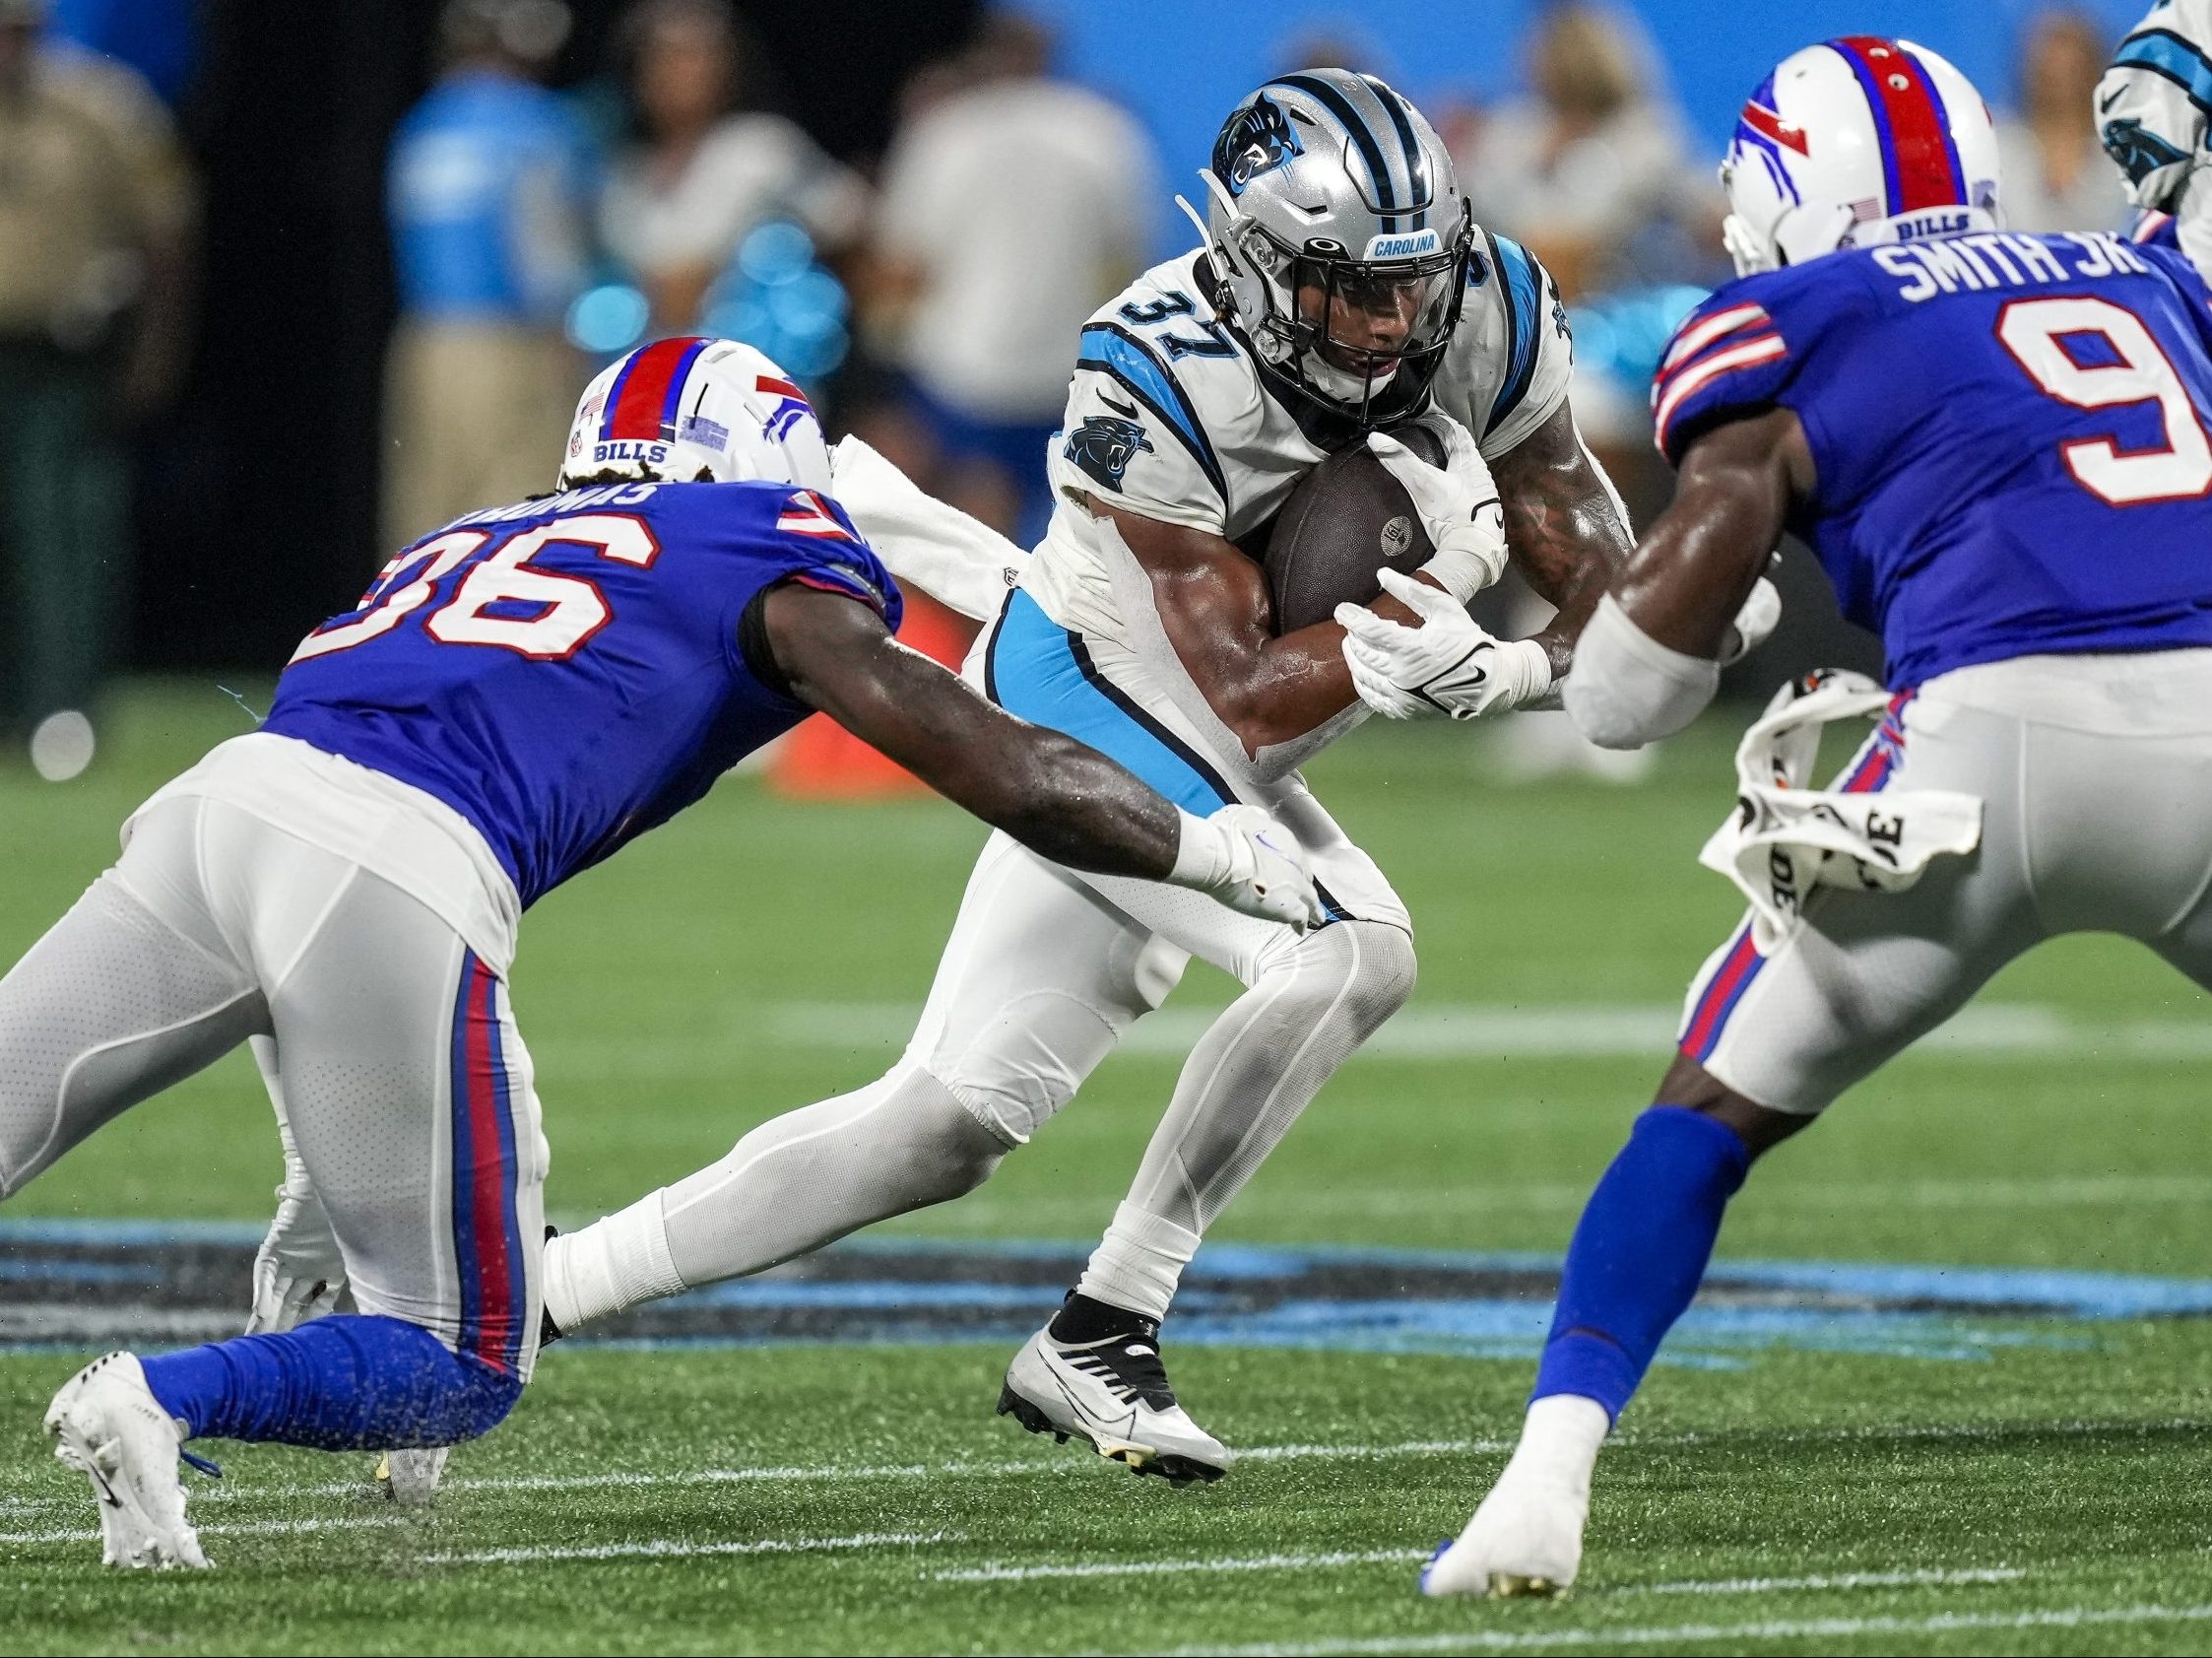 Opinion: Comparing Isaiah McKenzie's usage to Cole Beasley's